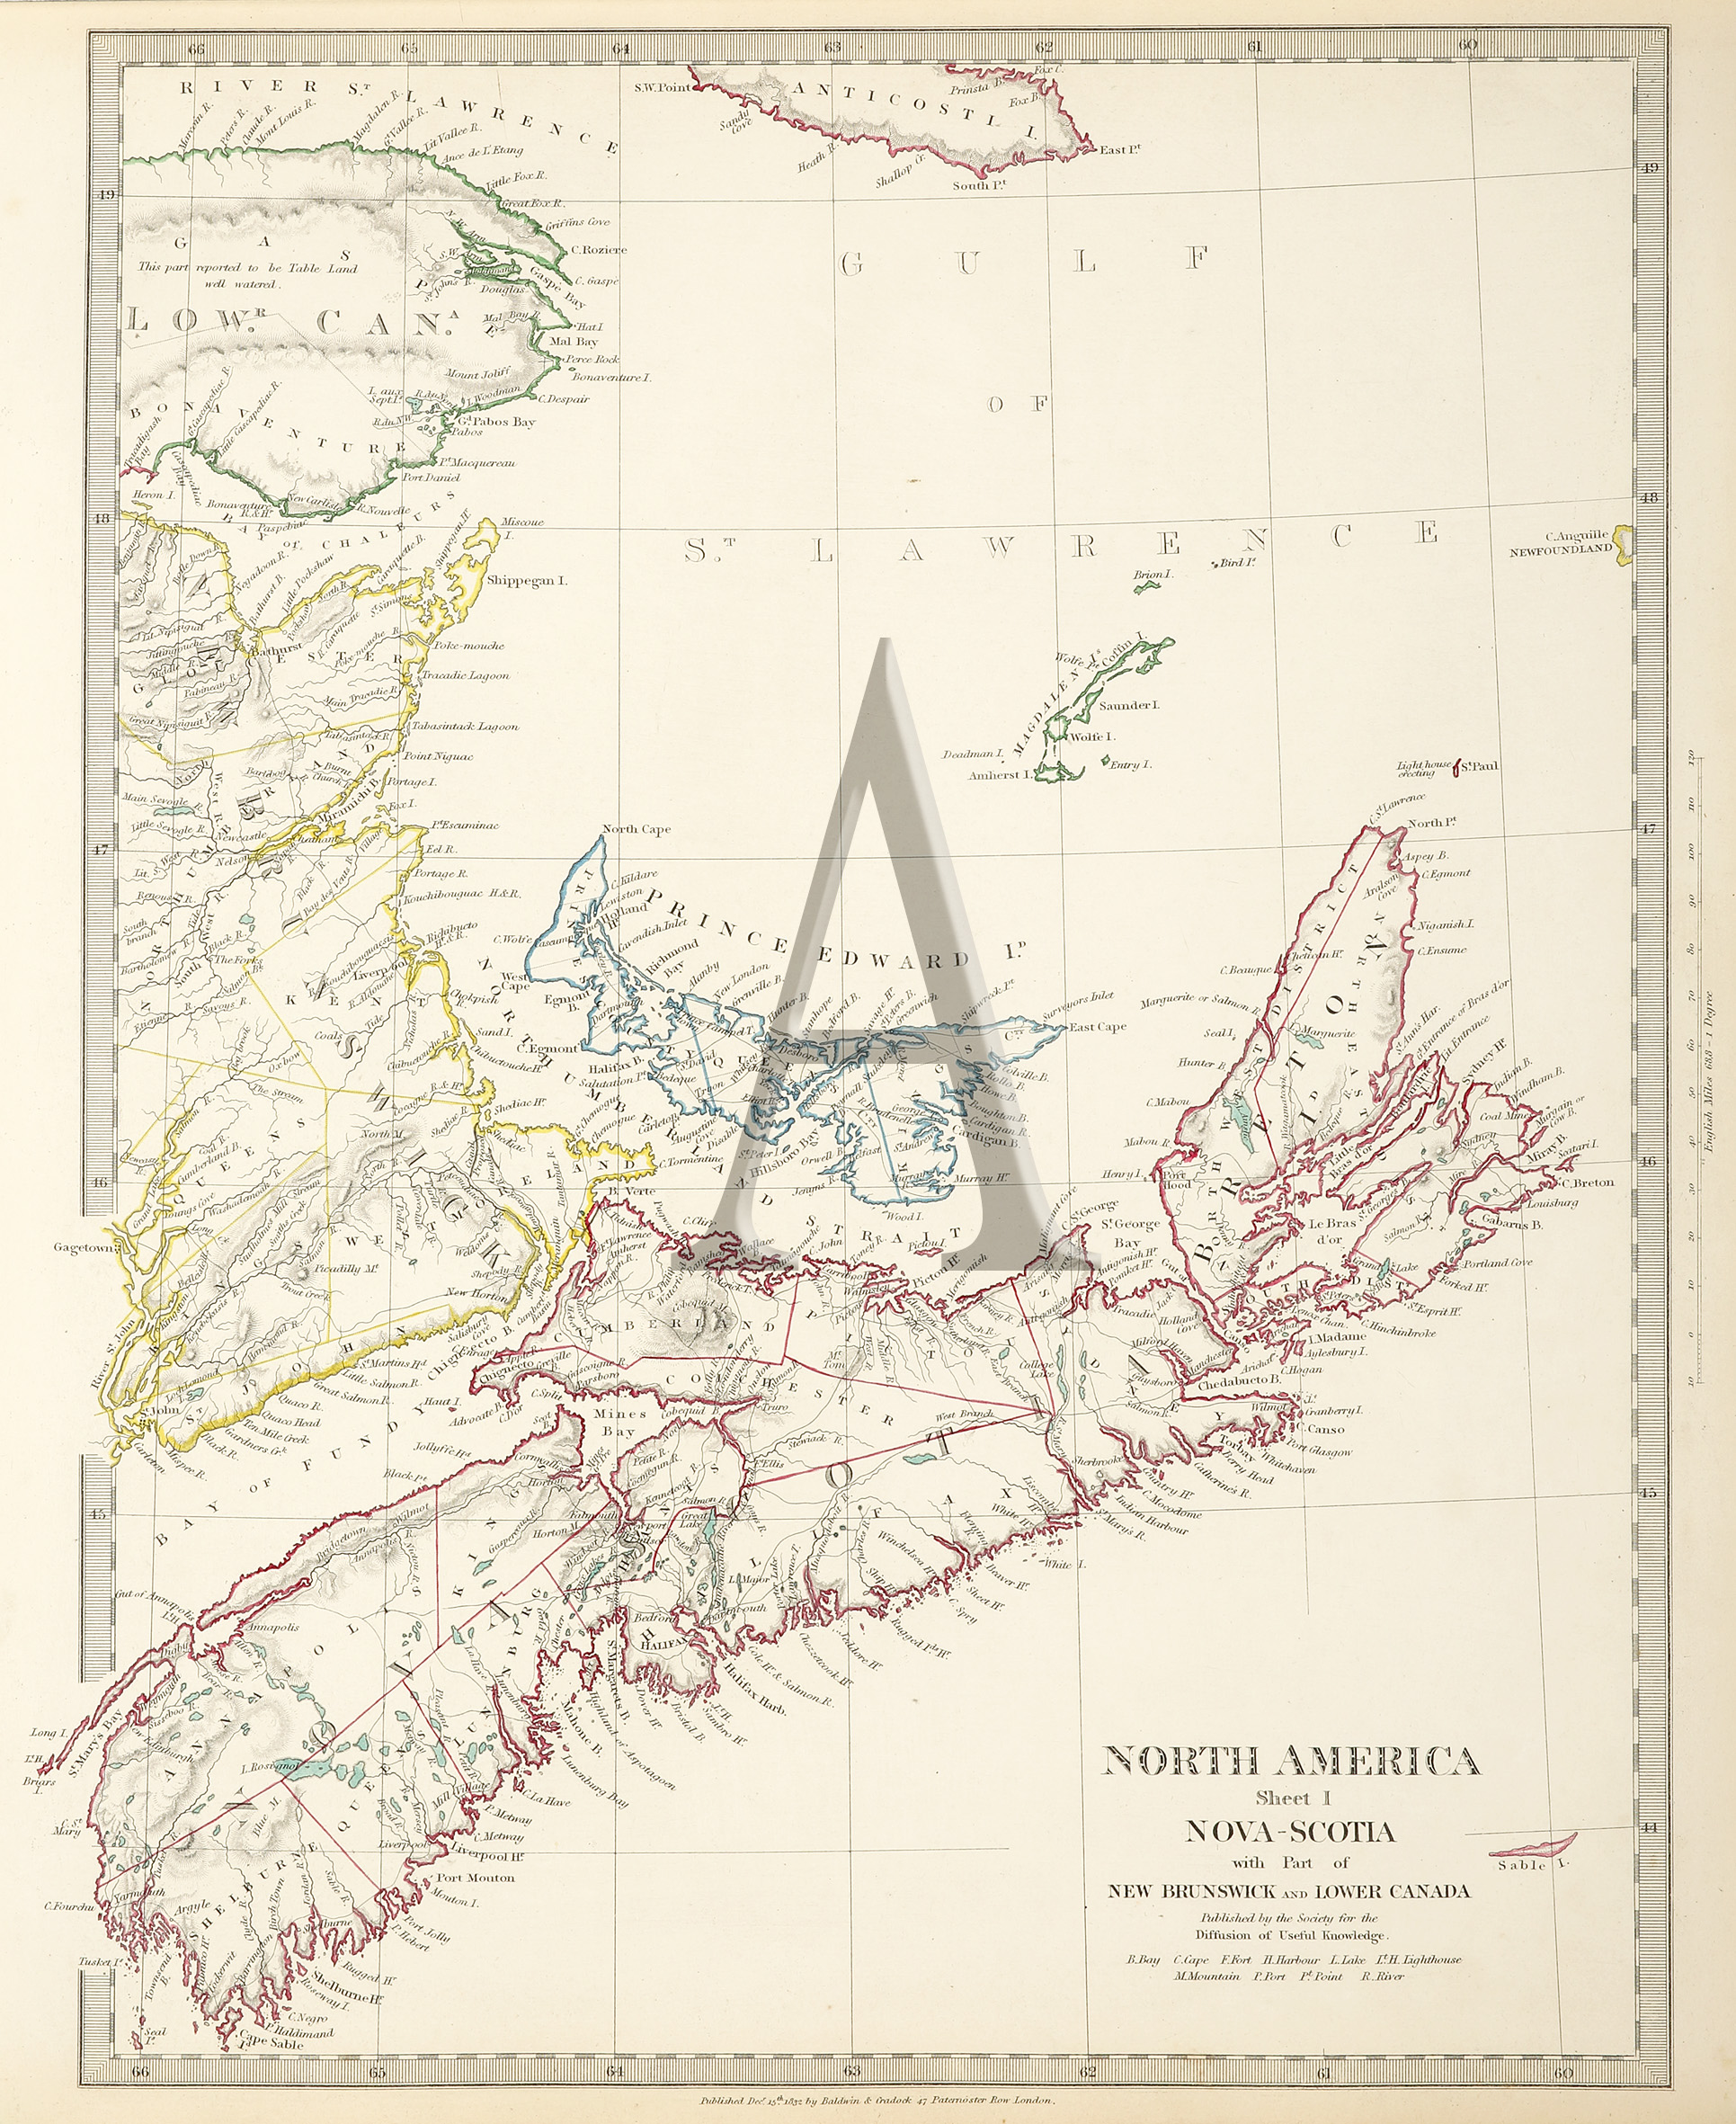 North America, Novia Scotia with part of New Brunswick and East Canada - Antique Print from 1832